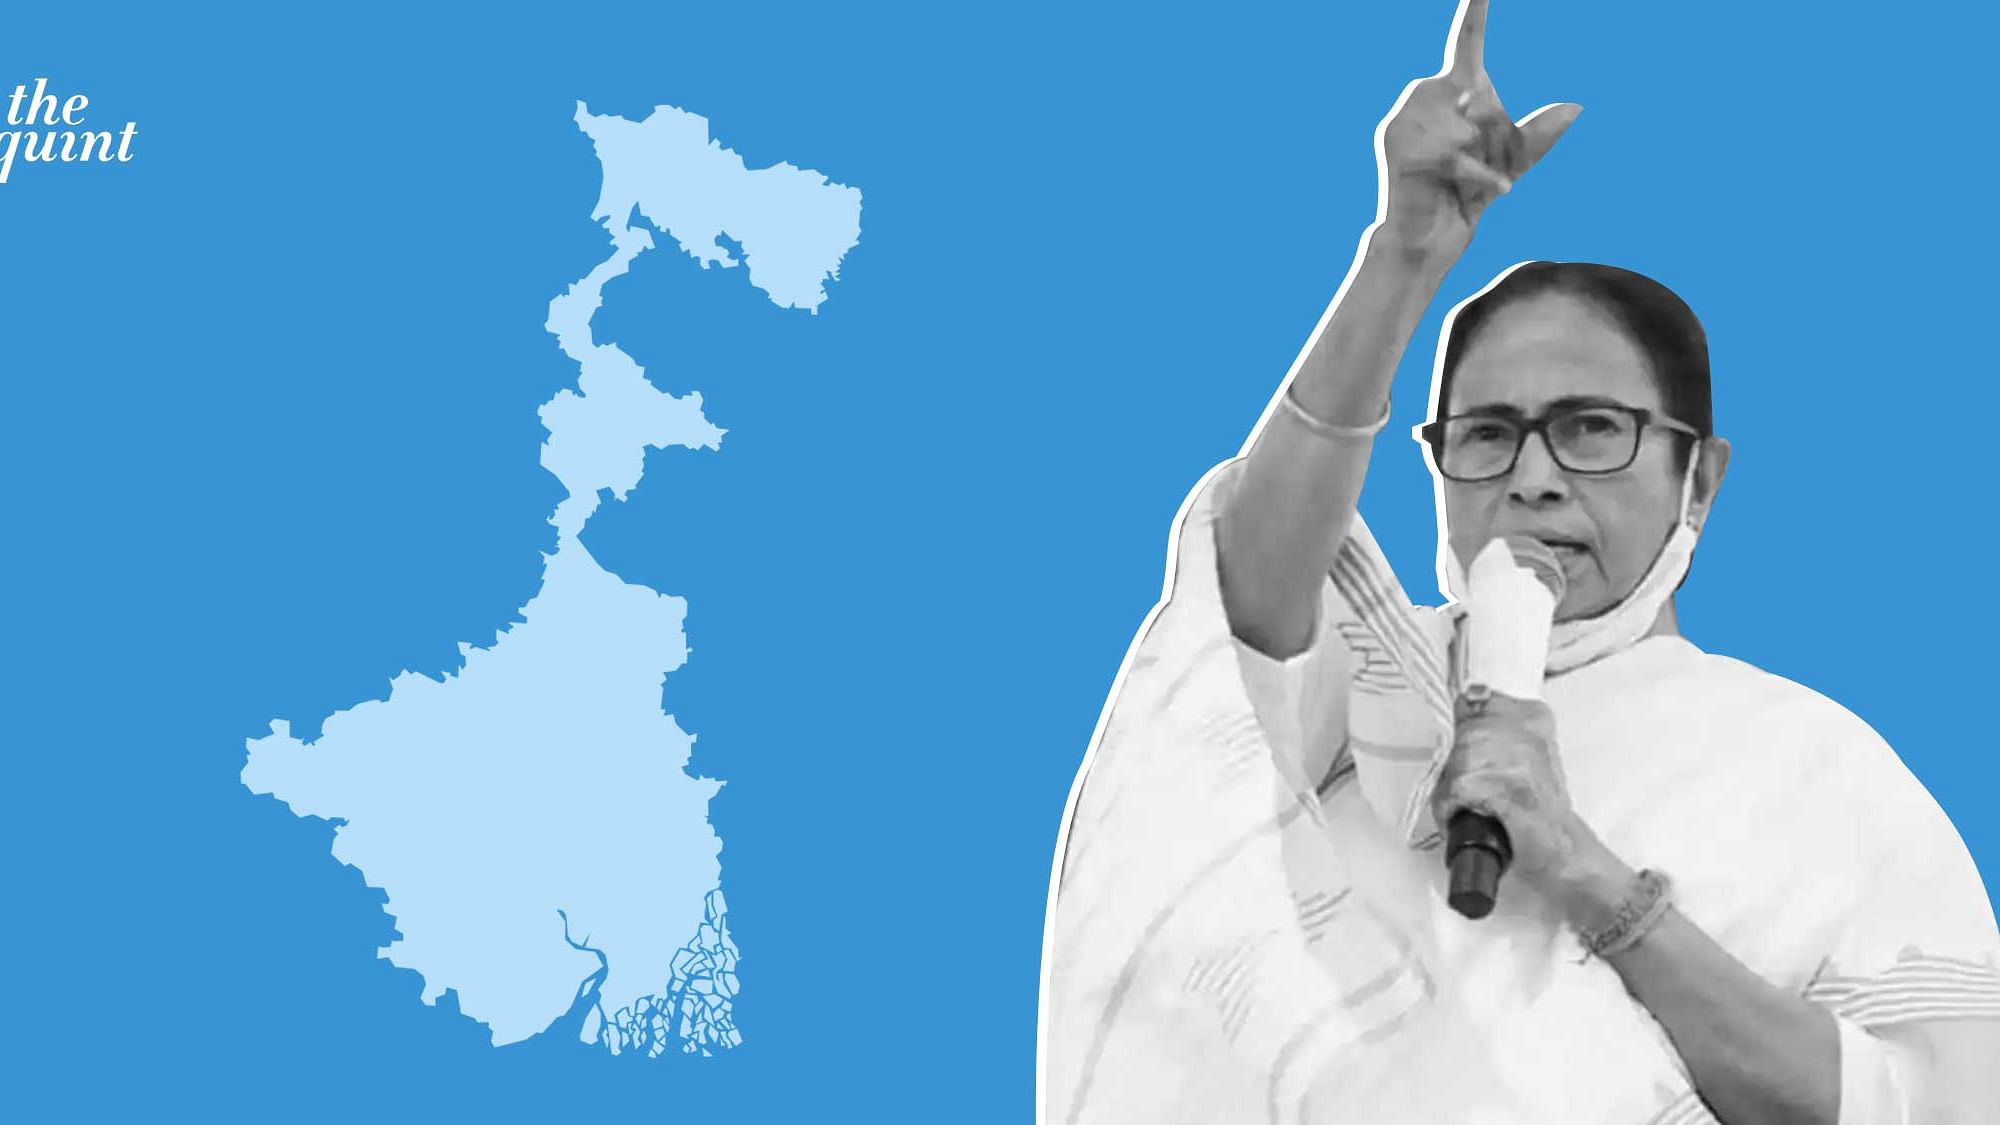 West Bengal Chief Minister Mamata Banerjee held a public rally in Hooghly district ahead of April-May elections. 